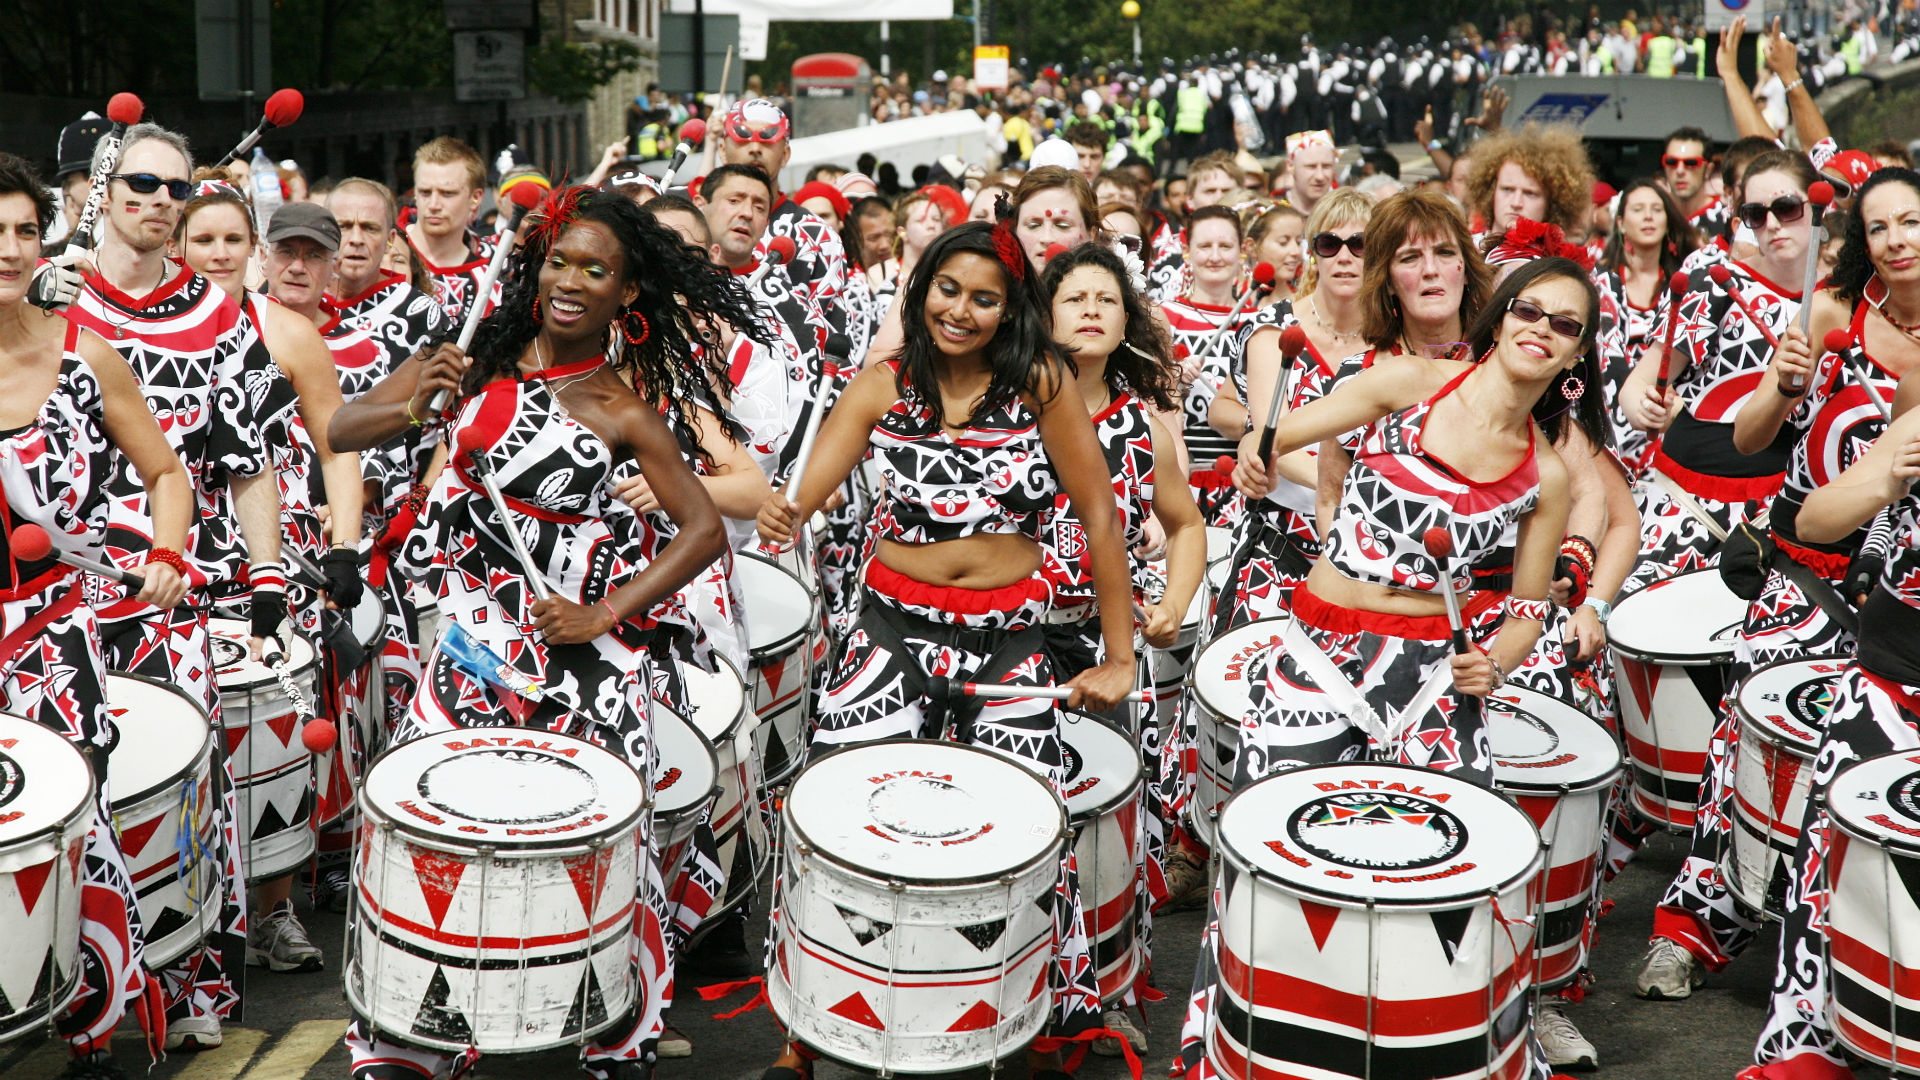 Top 10 tips for Notting Hill Carnival - Special Event - visitlondon.com